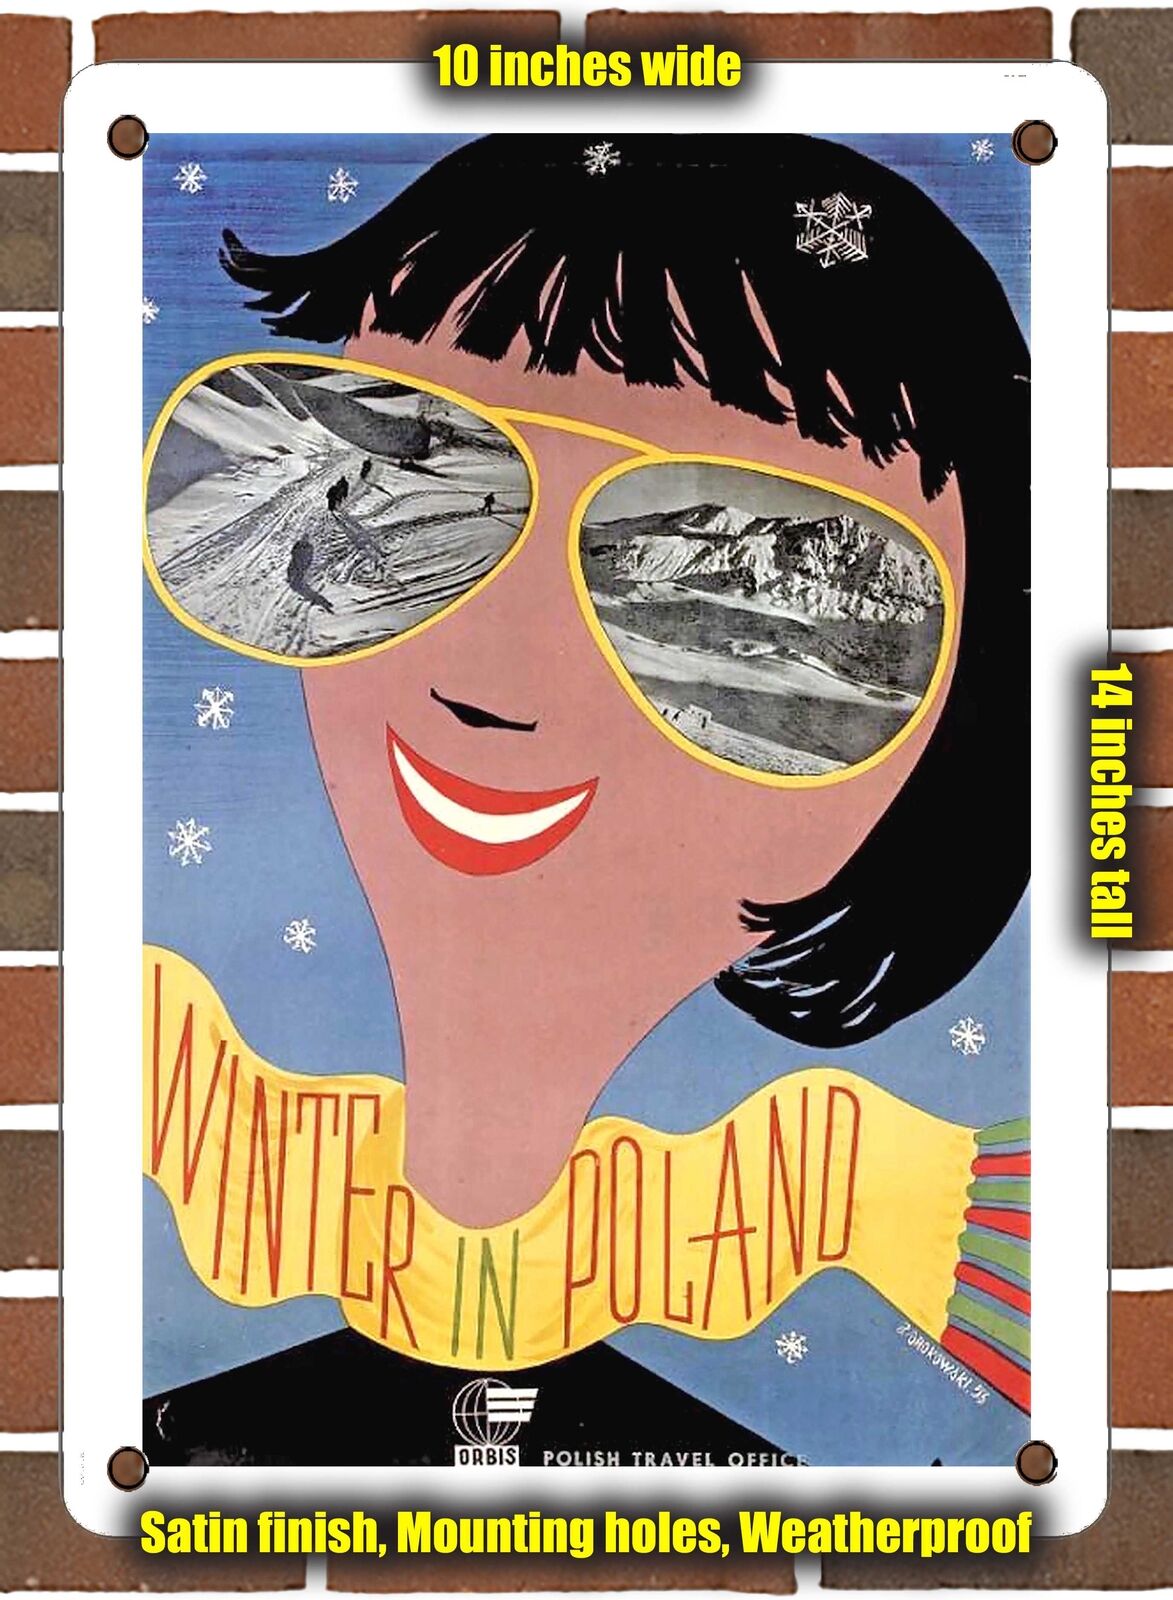 METAL SIGN - 1956 Winter in Poland - 10x14 Inches